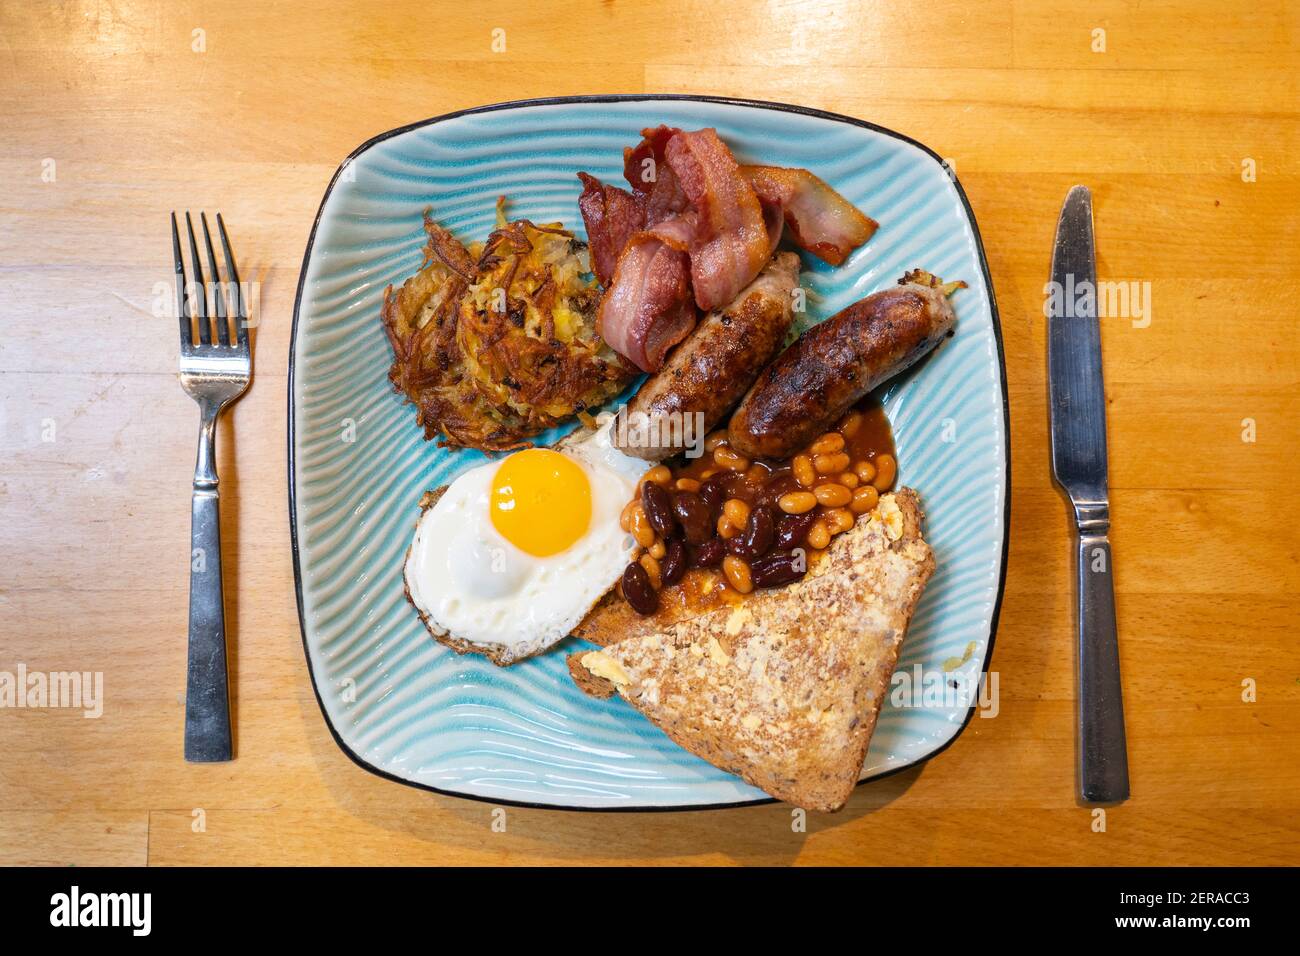 A traditional English breakfast served on a blue plate with sausages, a fried egg, rashers of bacon, a hash brown, beans and slices of toast Stock Photo